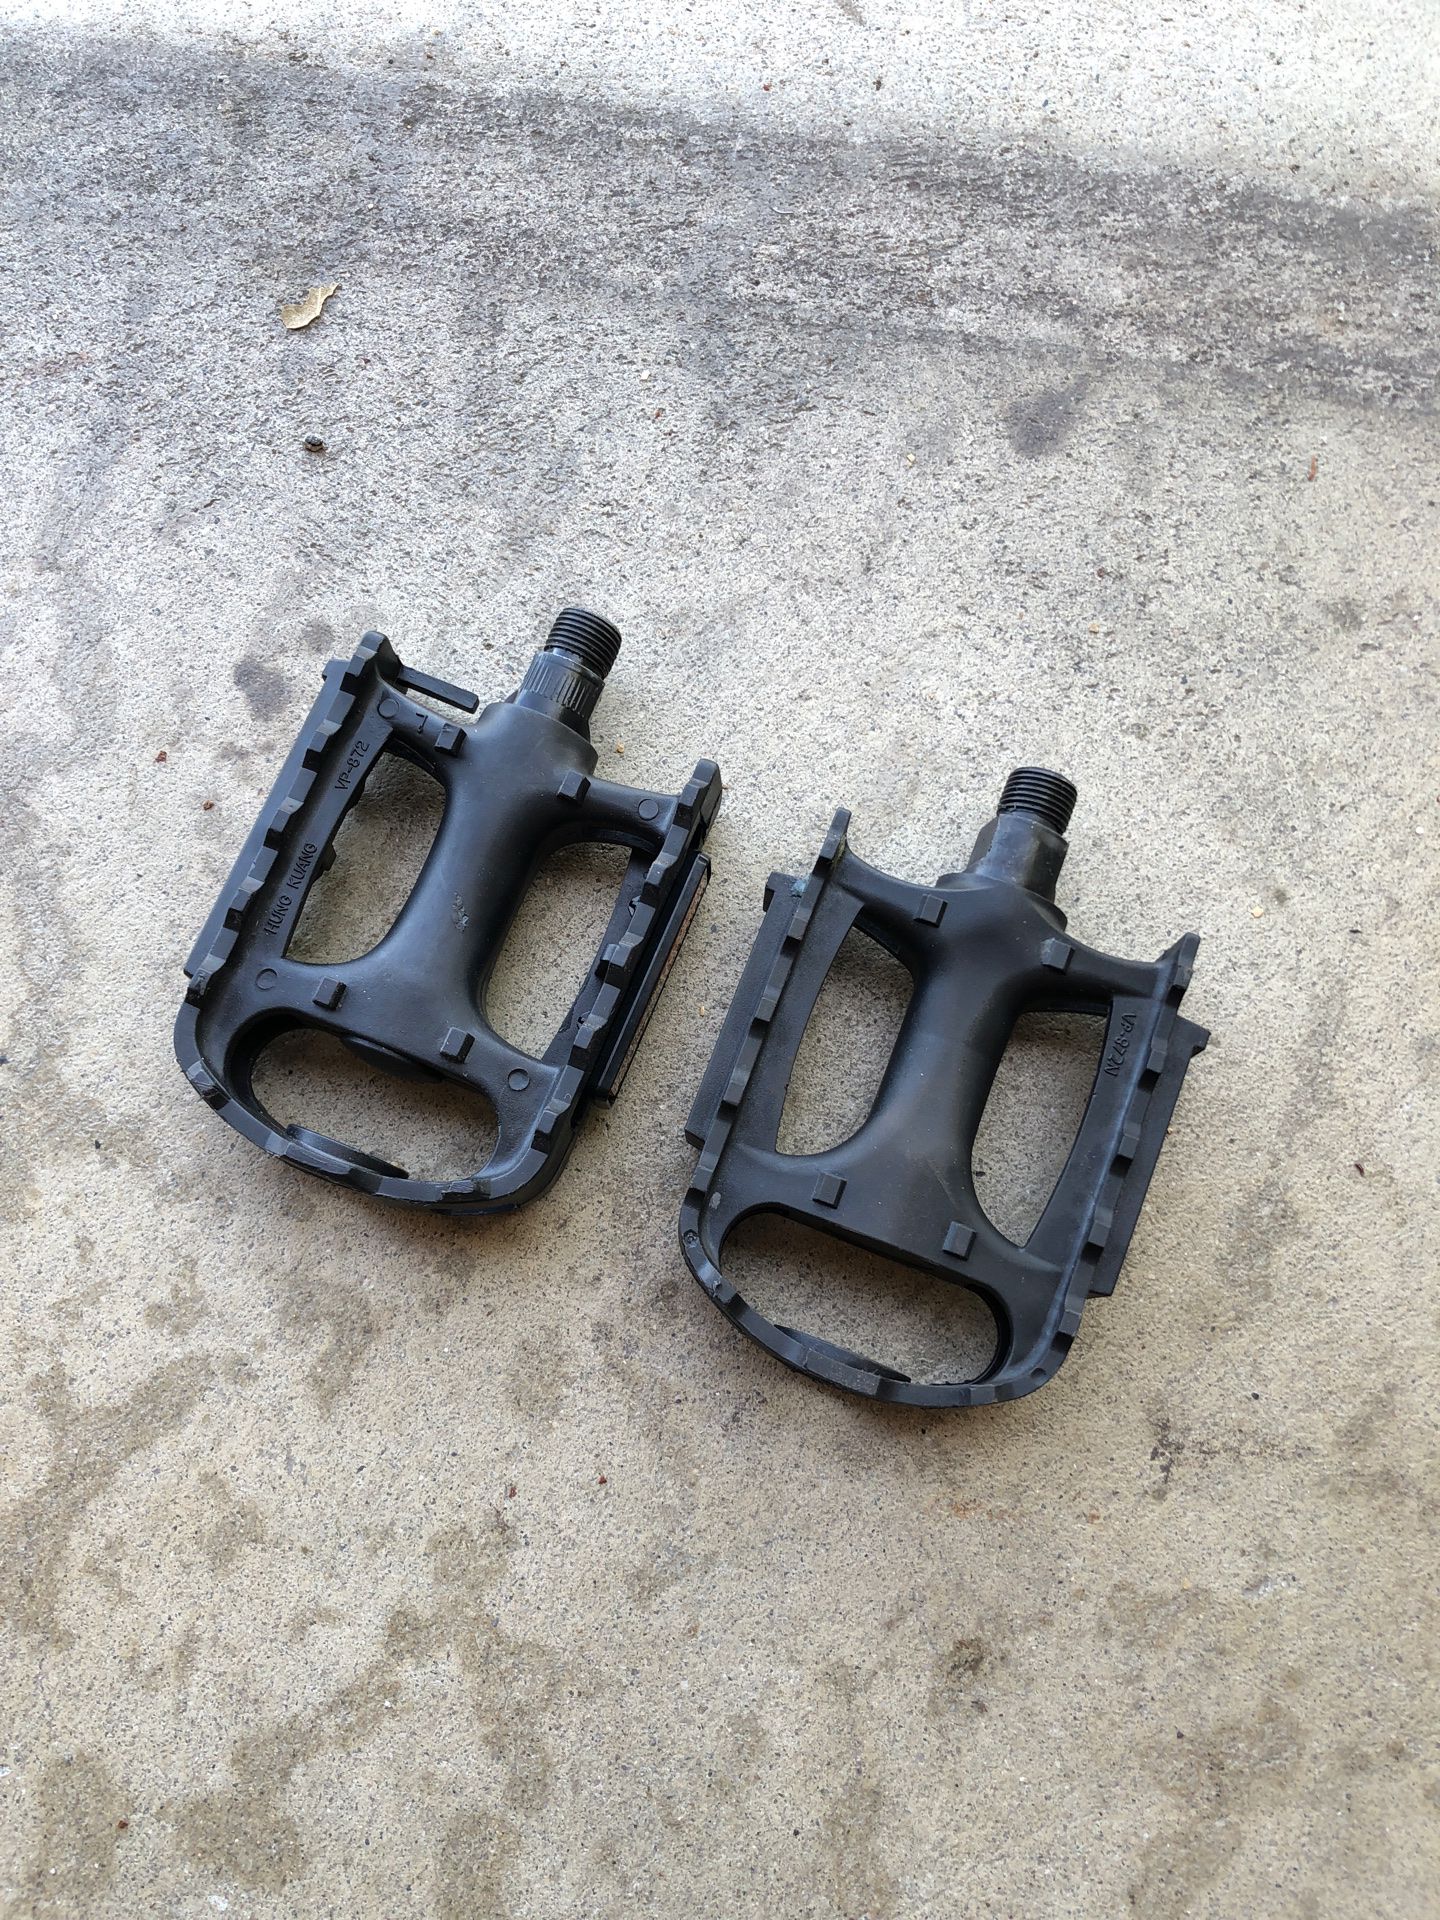 LIKE NEW, Bicycle Pedals, plastic mountain bike pedals, road bike pedals